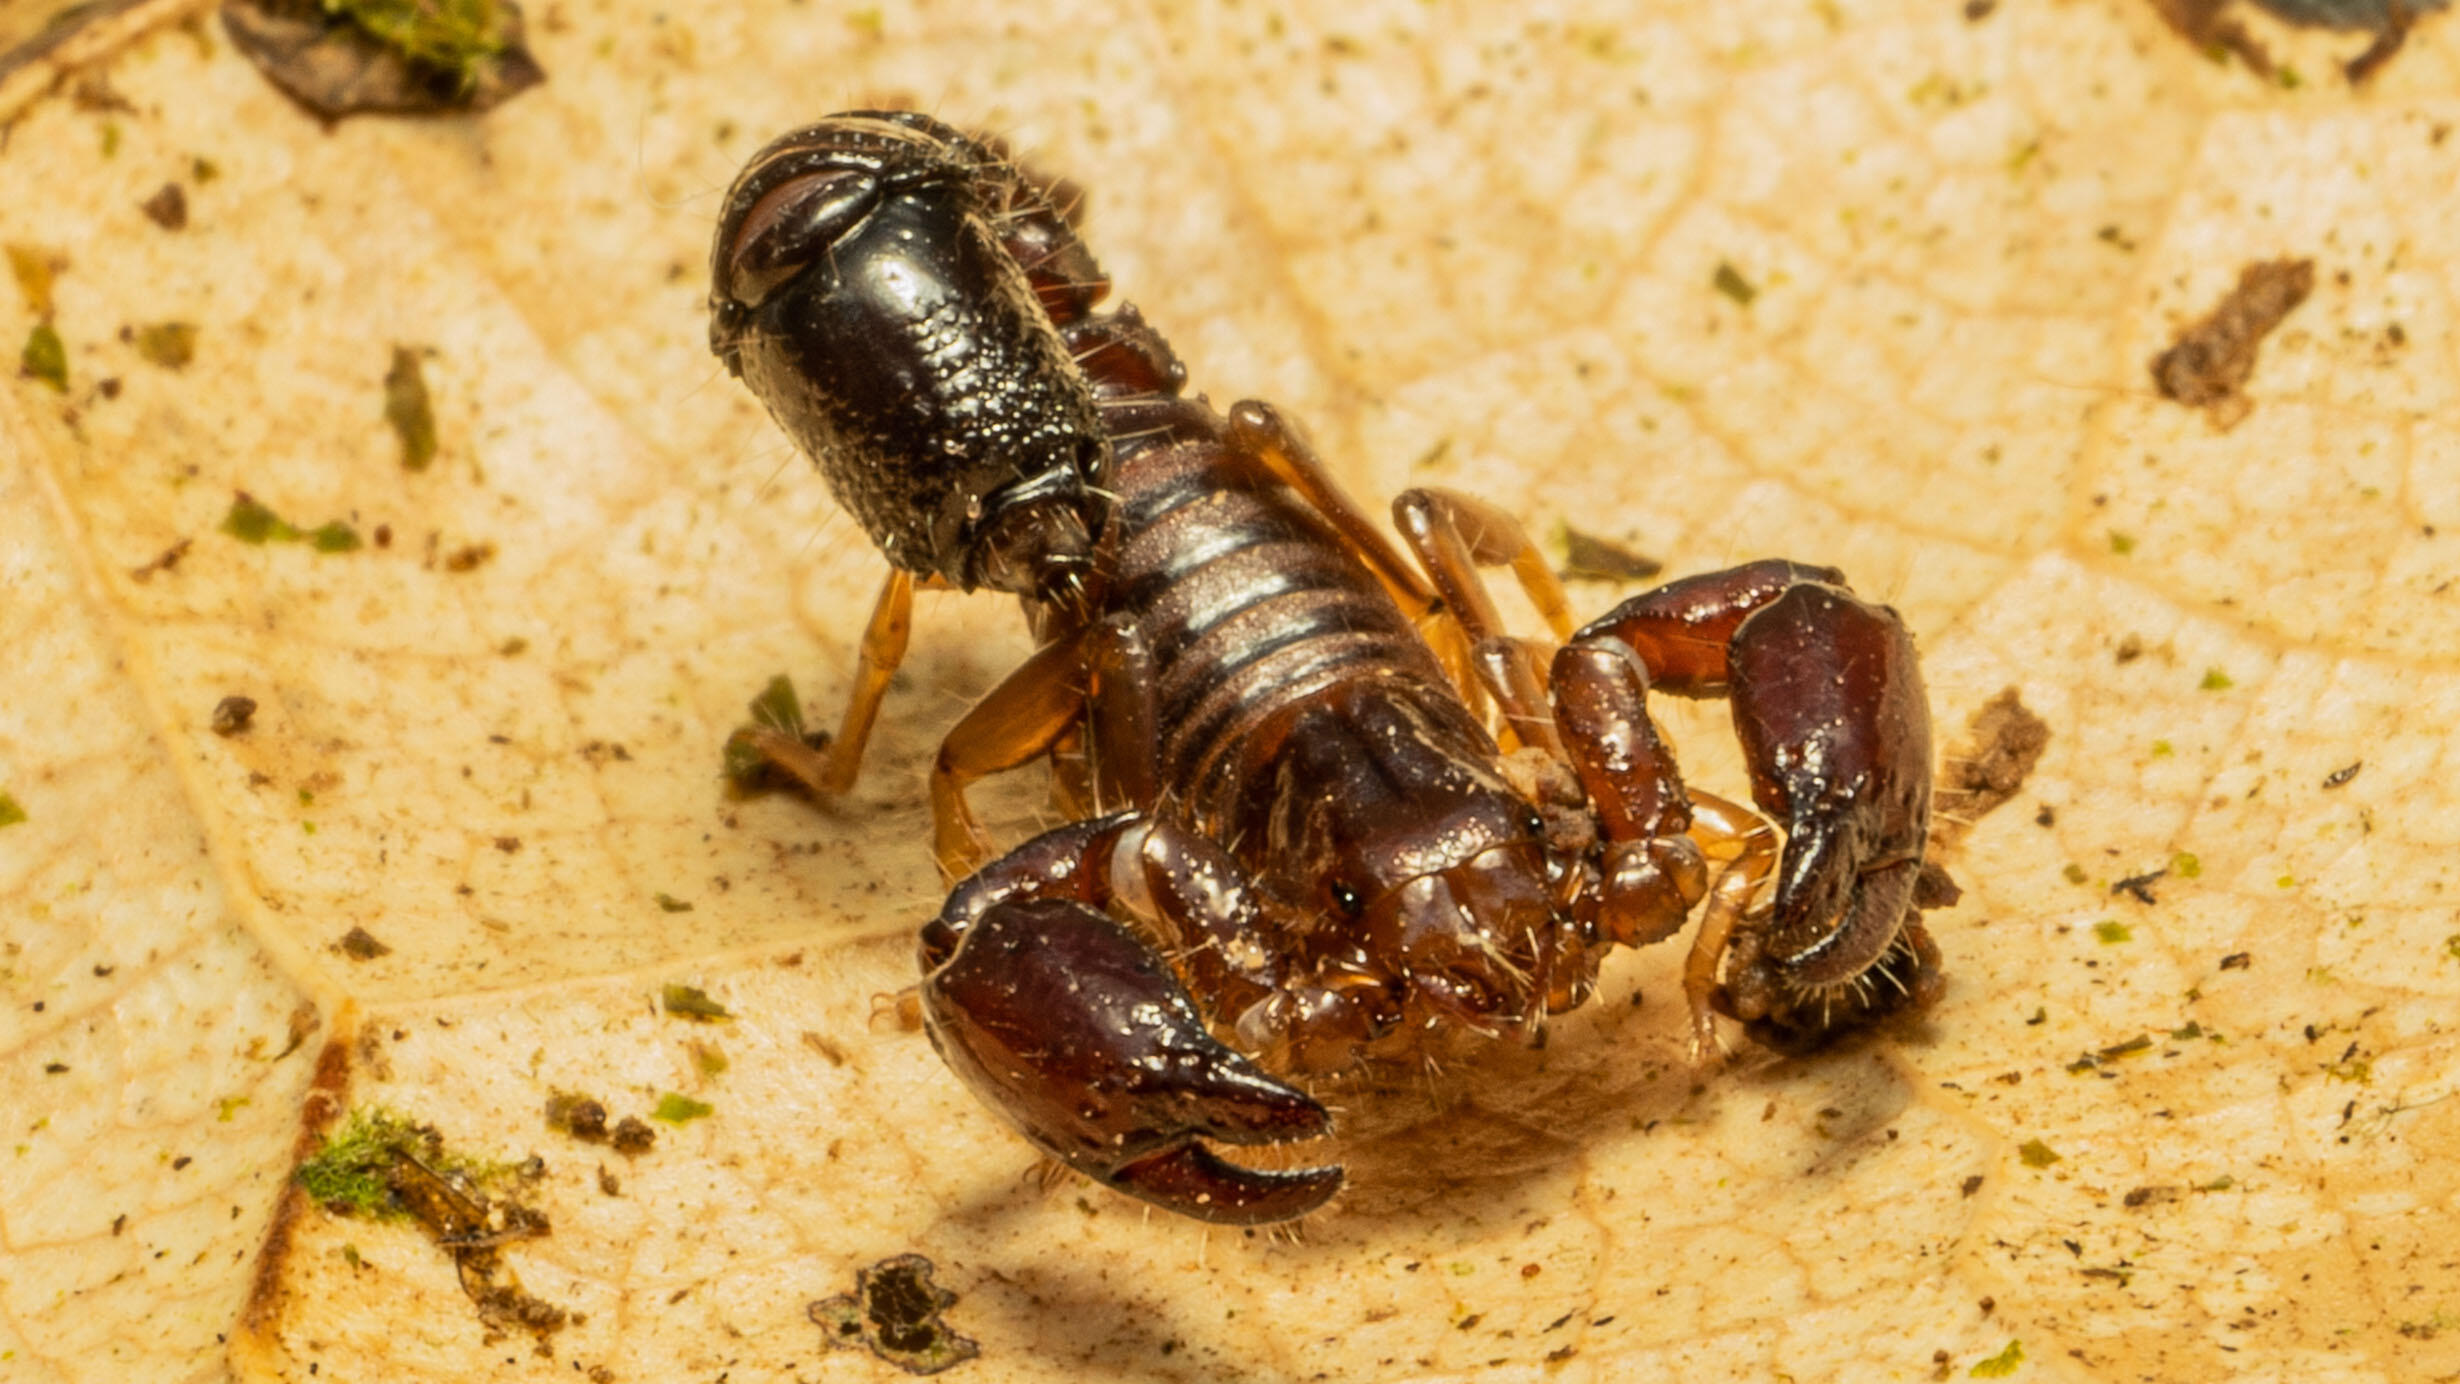 Close-up of a scorpion on a light colored surface.